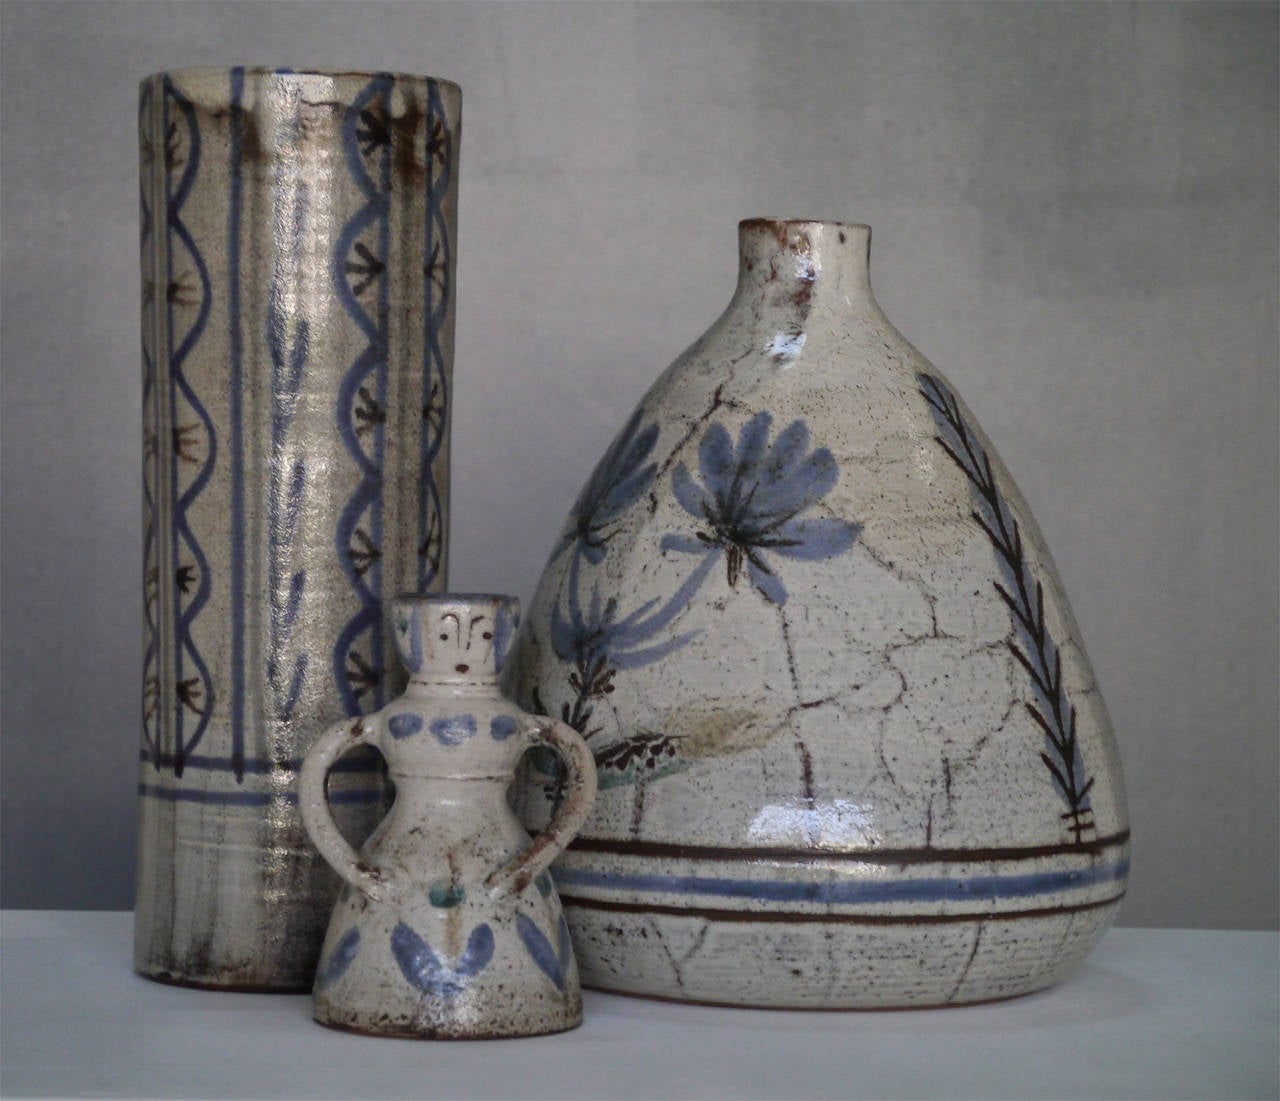 A wonderful grouping of two lamp bases and a cylinder-shaped vase.

Gustave Reynaud founded his Vallauris worshop in 1955 and often worked in close collaboration with his talented brother-in-law, Jean Derval.

Both density and poetry of these